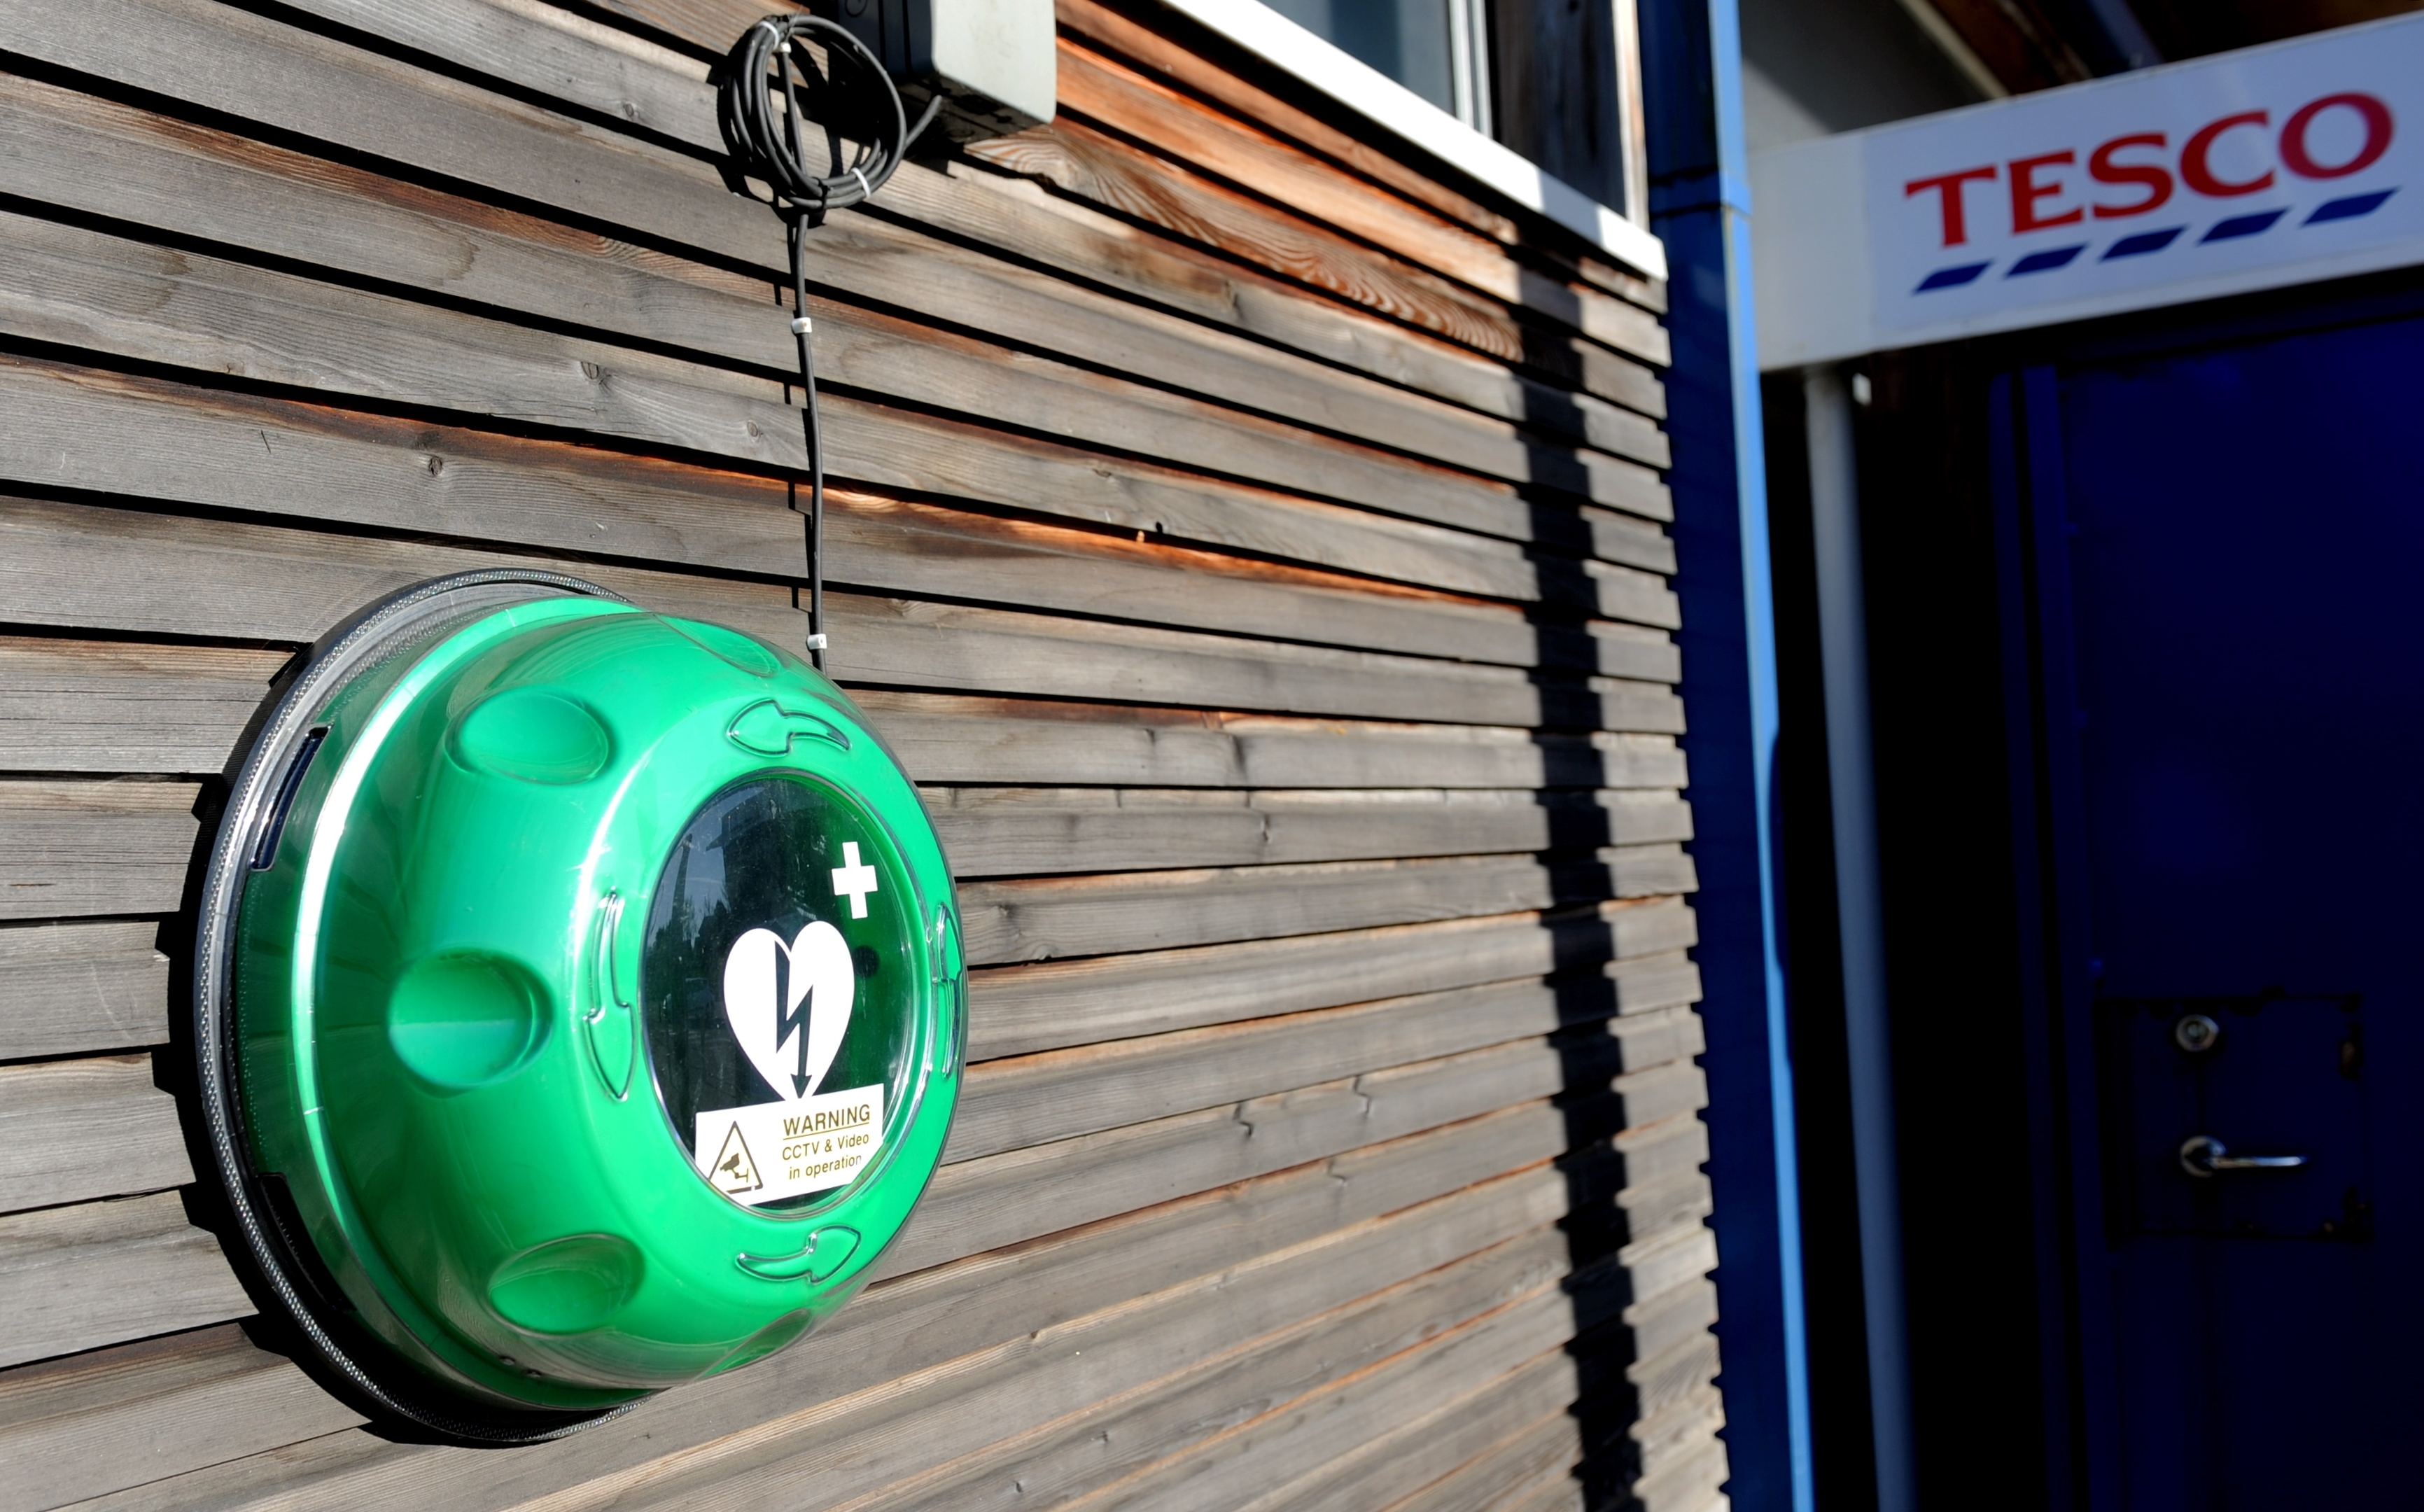 A Defibrillator box at Tesco, Newtonhill, where the defibrillator has gone missing.